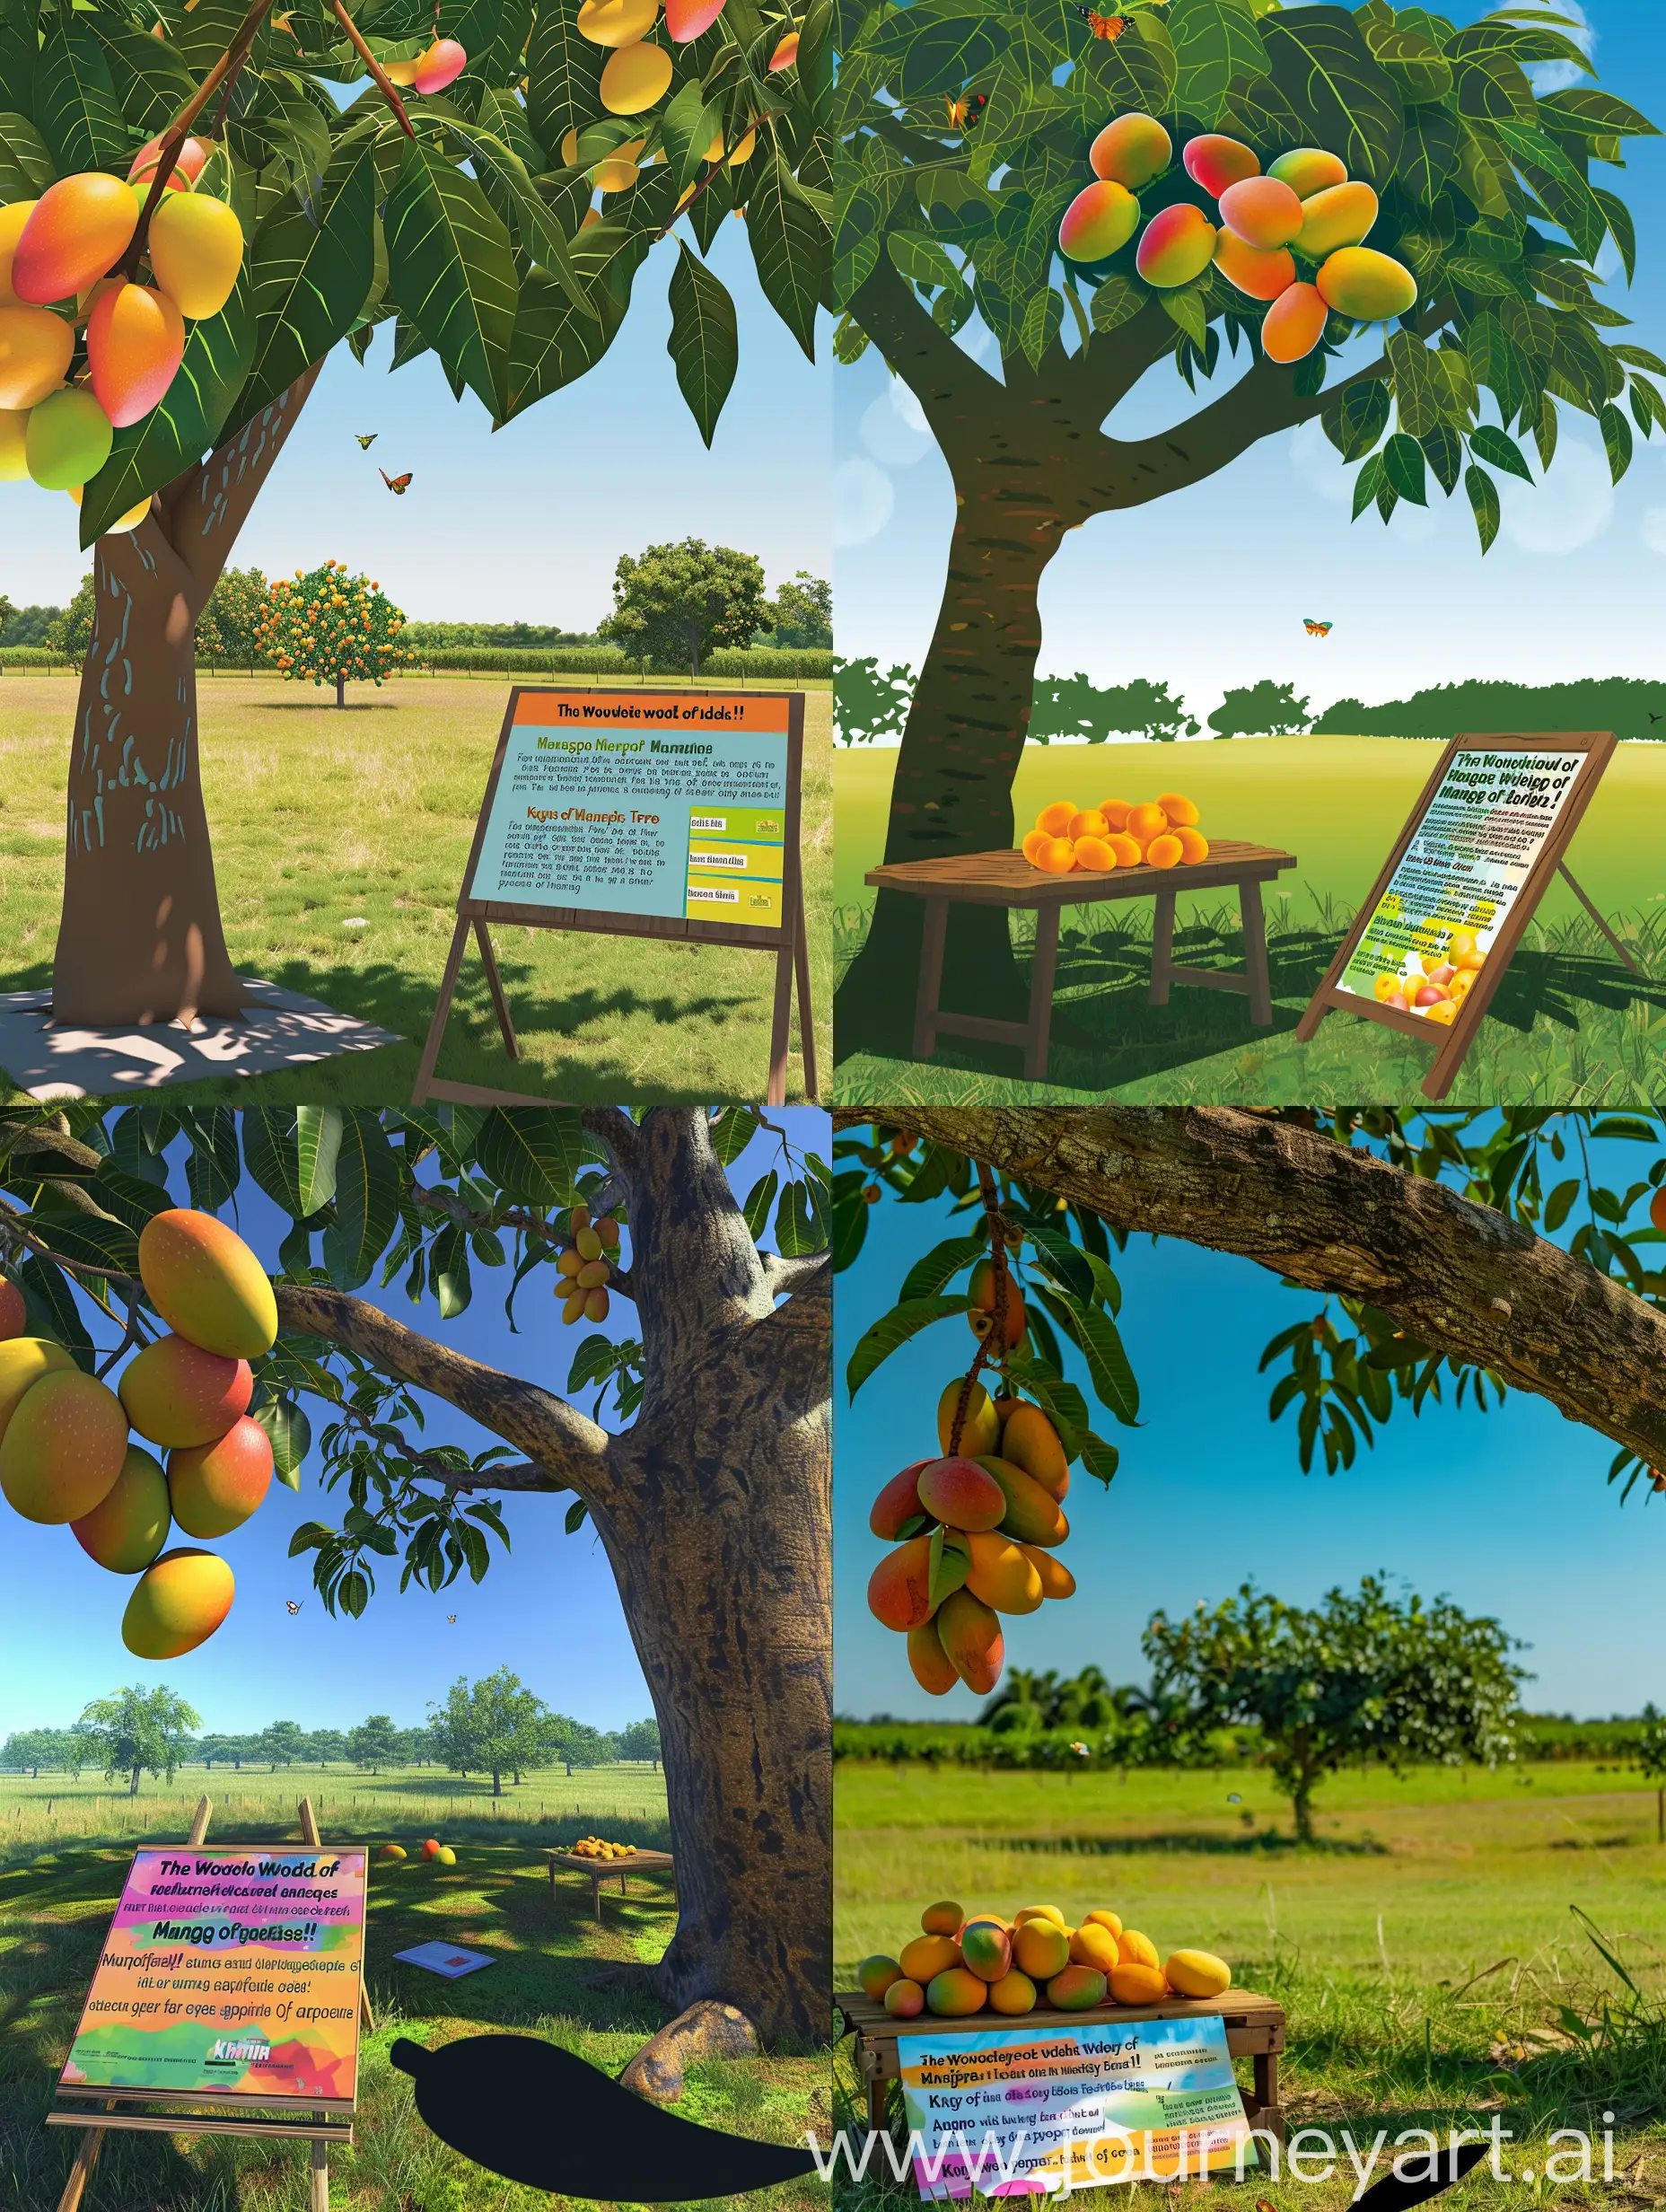 Background:  A sunny day with a clear blue sky. A grassy field stretches out in the background, dotted with a few other trees in the distance. Perhaps some colorful butterflies are fluttering around. Center:  A mature mango tree dominates the center of the image. Its thick, brown trunk extends upwards, branching out into a wide, leafy canopy. The canopy is a lush green color, providing shade on the ground below. Left side (close-up):  A cluster of ripe mangoes hangs from a branch in the foreground, slightly to the left. The mangoes are a vibrant yellow-orange color, with some having a reddish or greenish blush on their skin. Right side (information table):  A wooden table with a slanted top stands beside the tree. A colorful sign rests on the table, titled "The Wonderful World of Mango Trees!" in large, friendly letters. Below the title, bullet points provide interesting facts: Scientific Name: Mangifera indica Origin: South Asia, Southeast Asia Fun Fact: Mangoes are known as the "King of Fruits"! Leaf Shape: Long and oval with smooth edges Flowers: Small, fragrant, white or pale pink flowers in clusters Fruit: Mangoes are delicious, juicy fruits that come in many colors and sizes! They are a great source of vitamins. Bottom:  A small silhouette of a long, slender mango leaf rests at the bottom of the image.